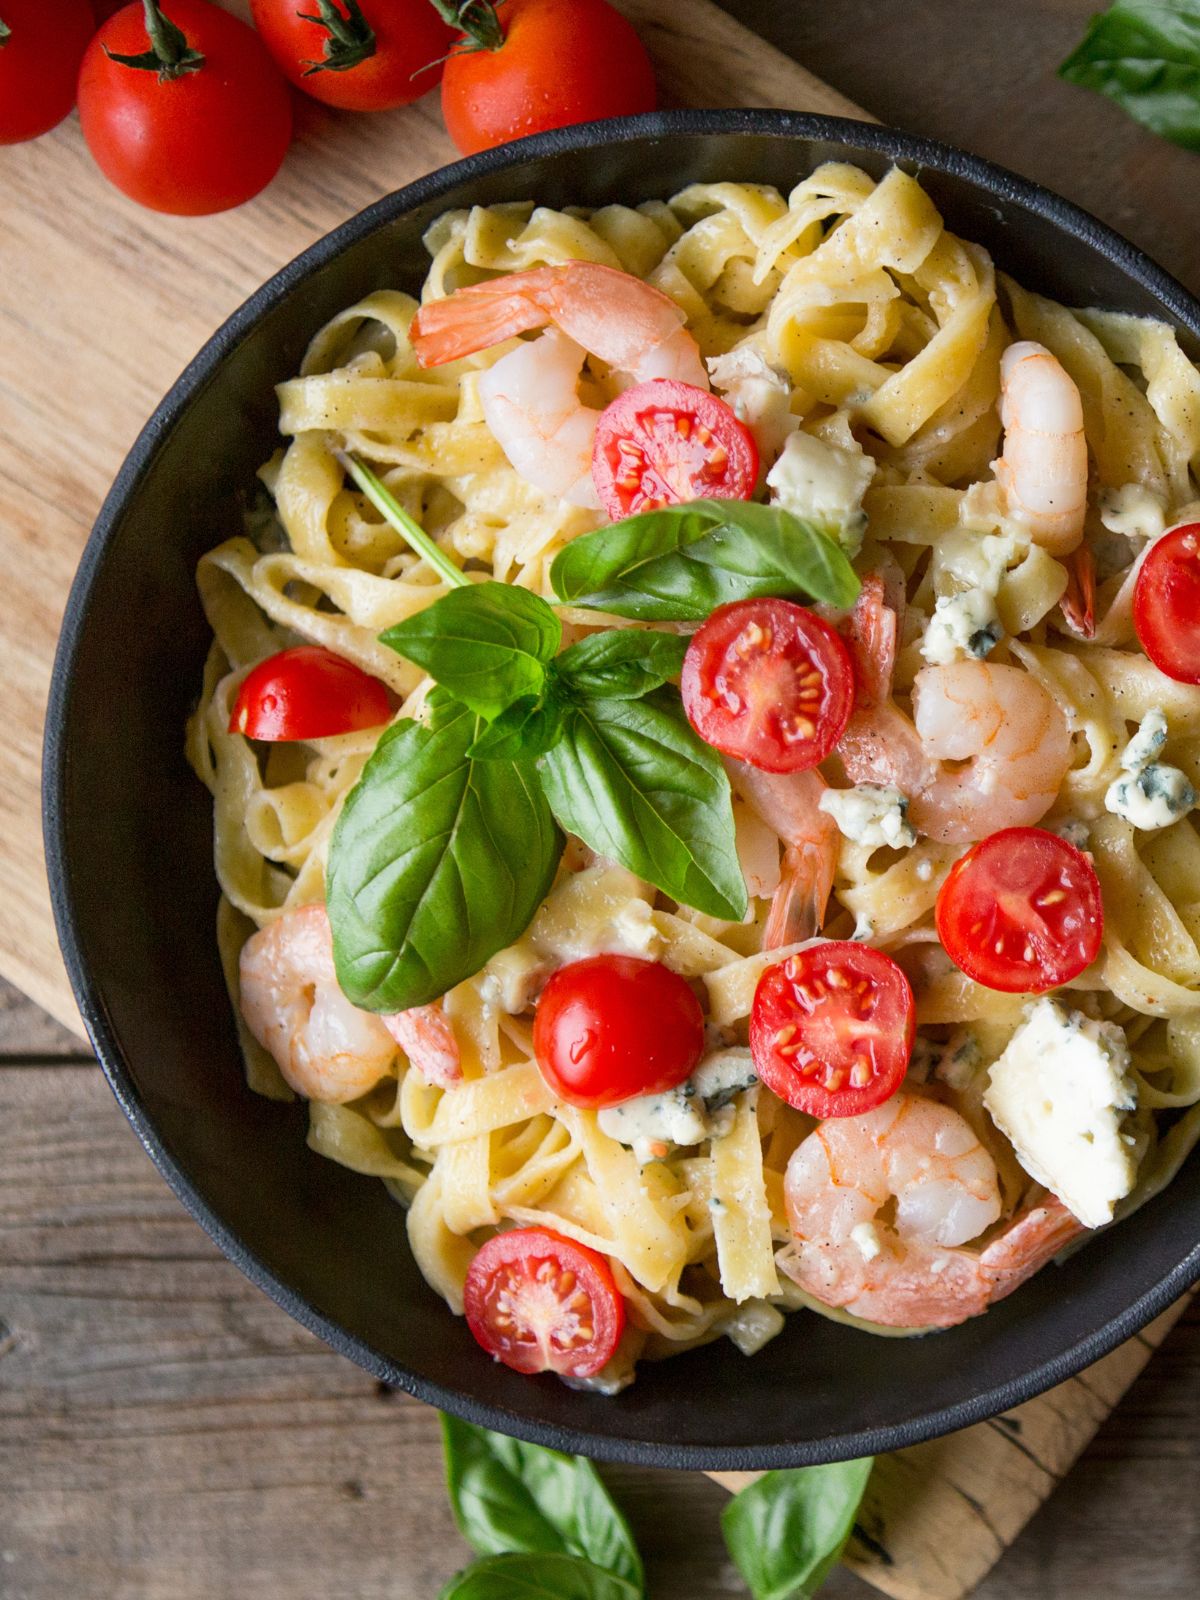 Pasta with shrimp and tomatoes in a skillet on a wooden table, garnished with fresh basil.